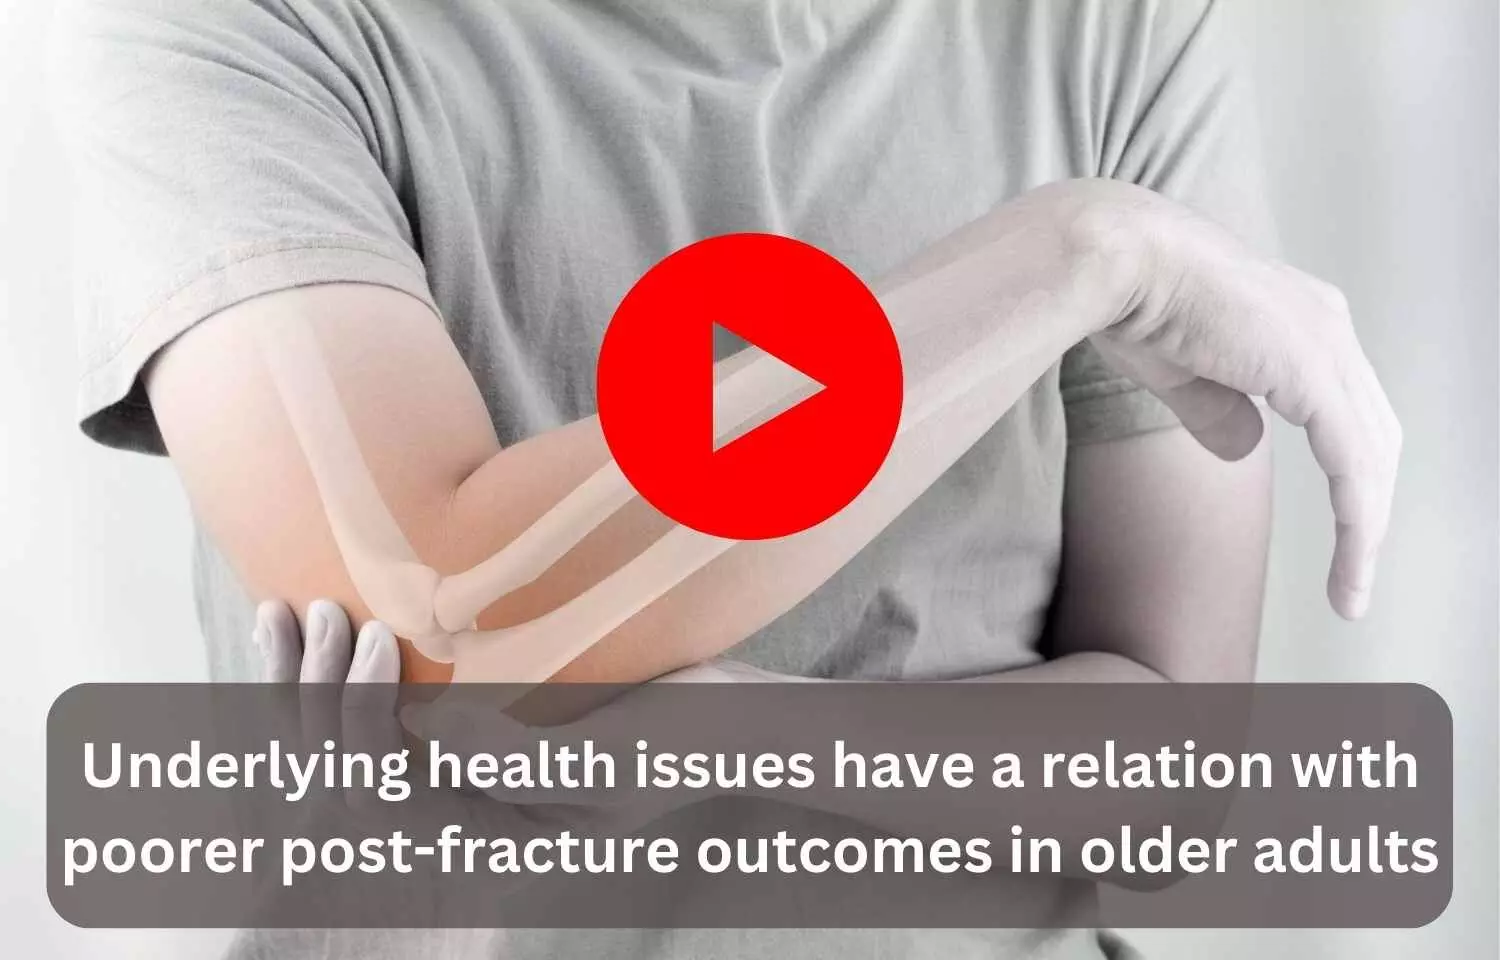 Underlying health issues have a relation with poorer post-fracture outcomes in older adults